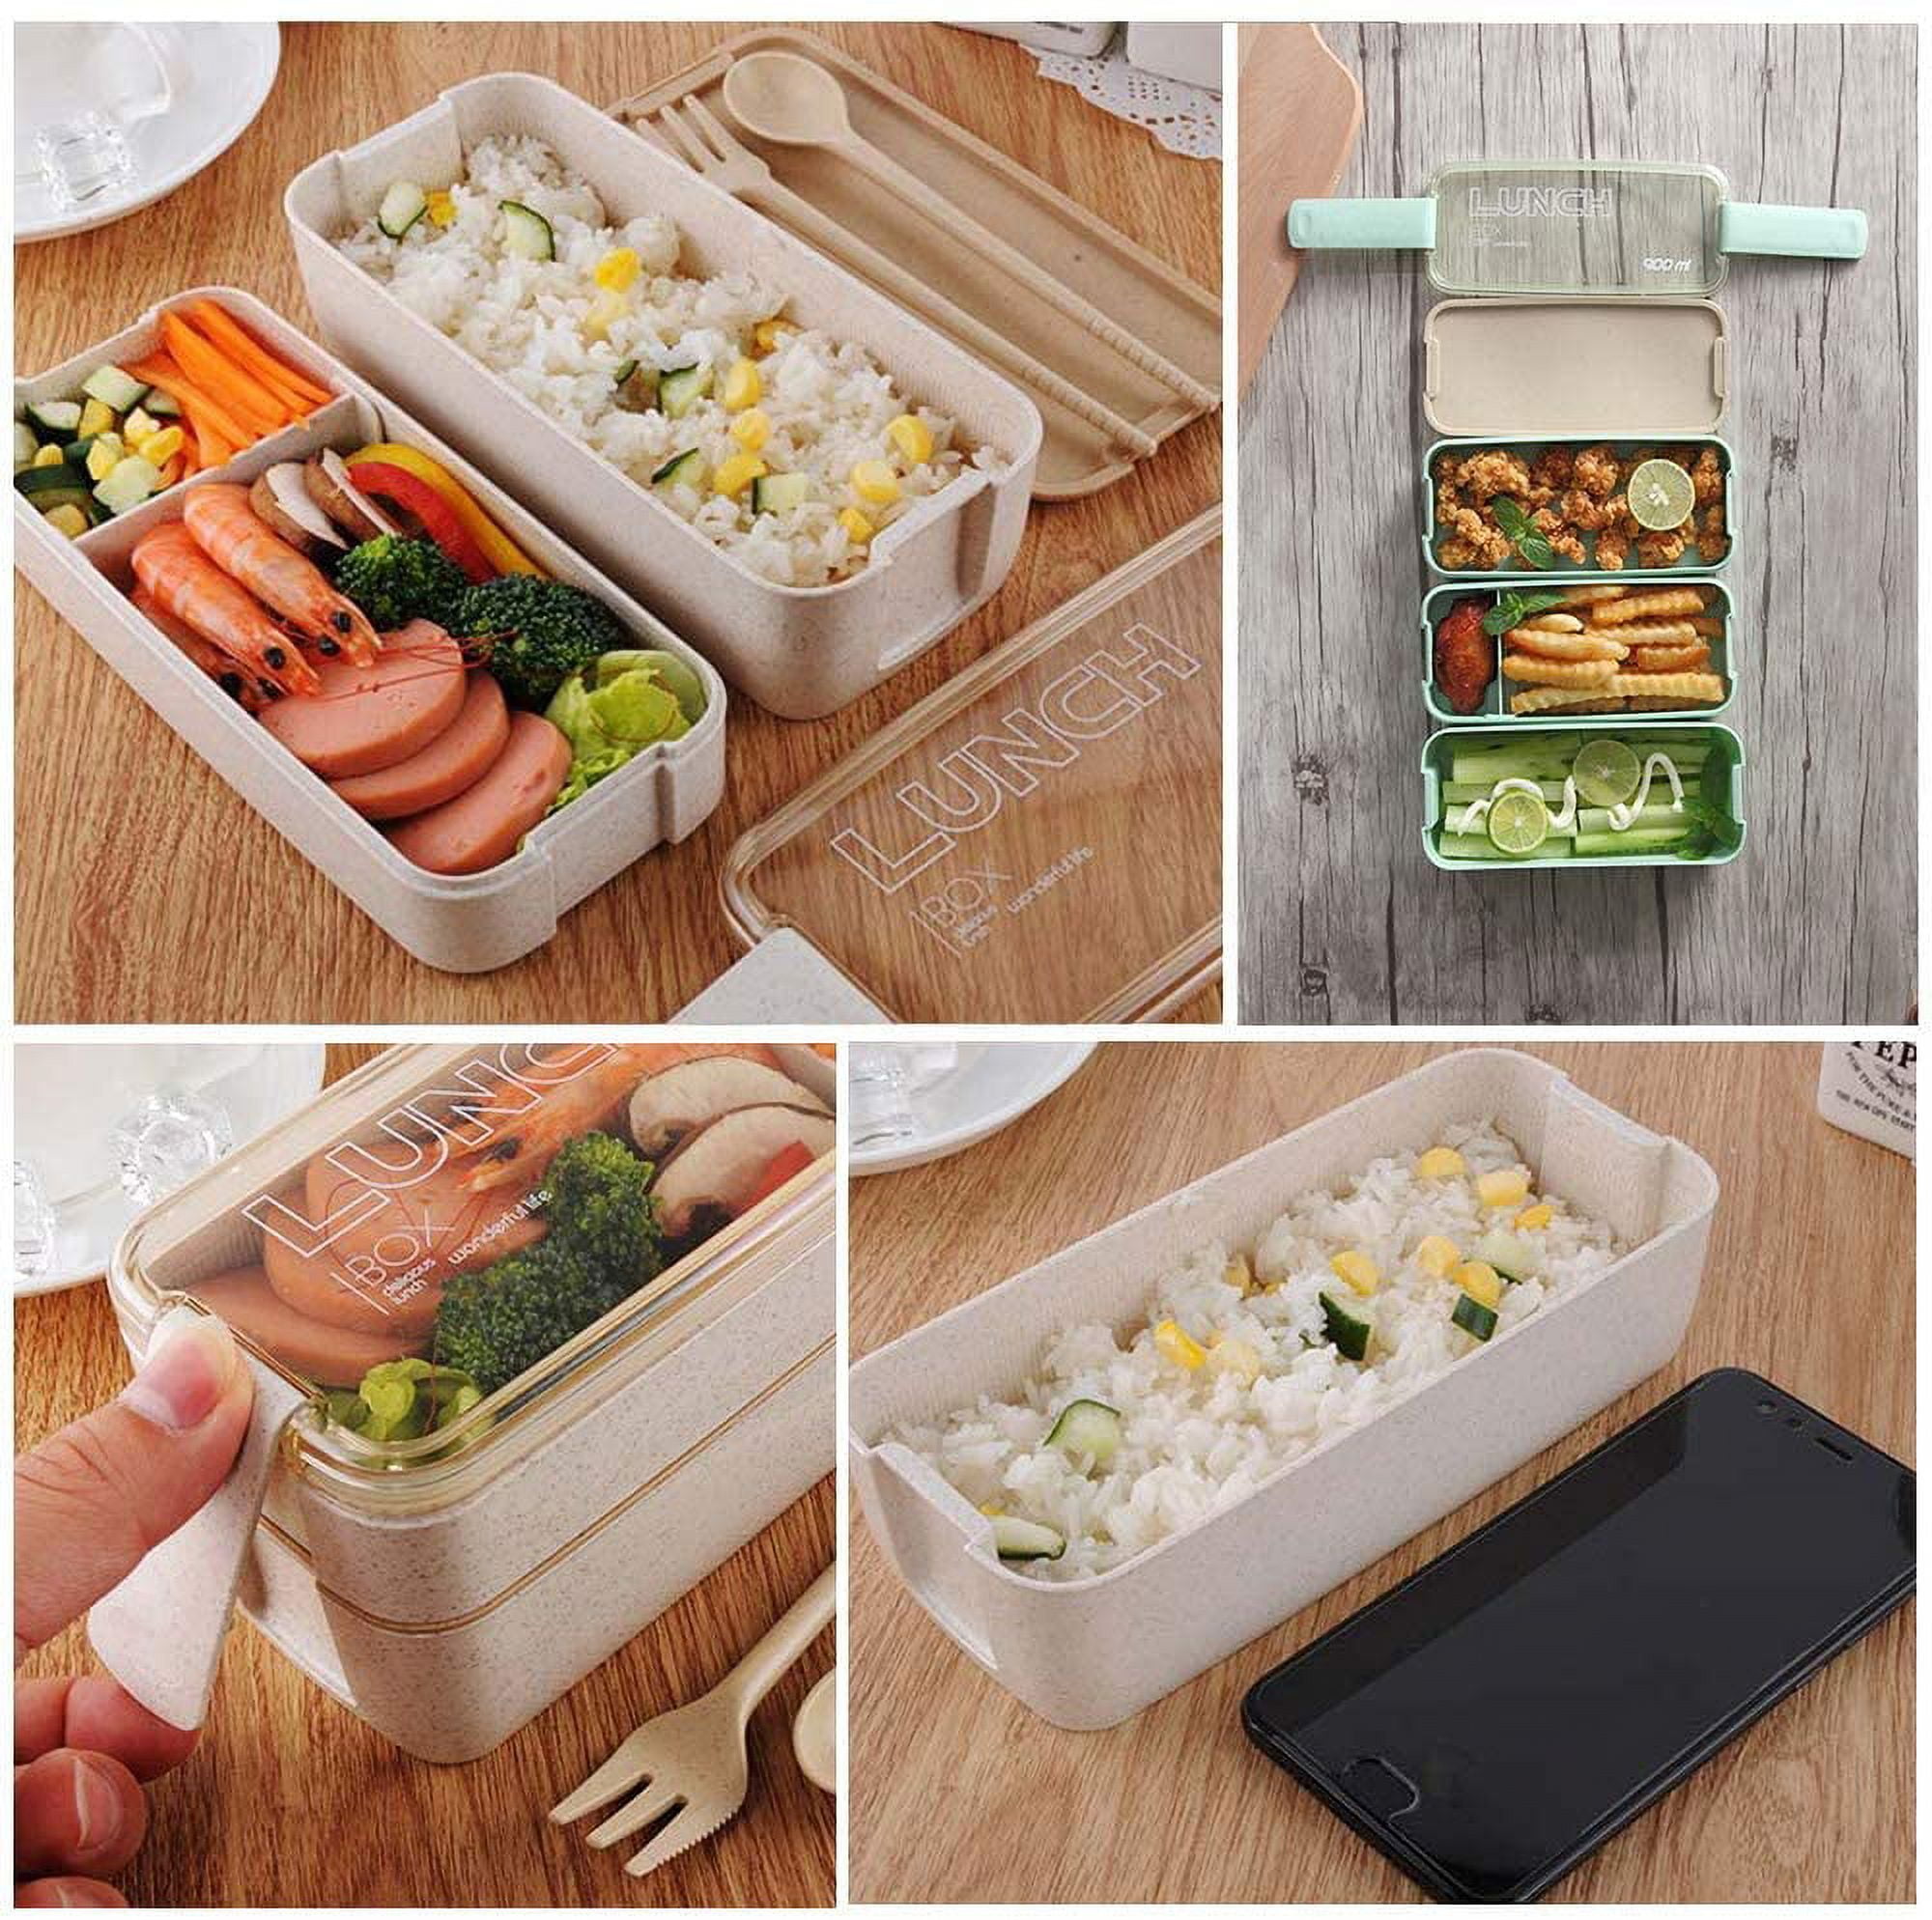 Lnkoo Portable Food Warmer School Lunch Box Bento Thermal Insulated Food Container 1 Layer Stainless Steel Insulated Square Lunch Box for Children